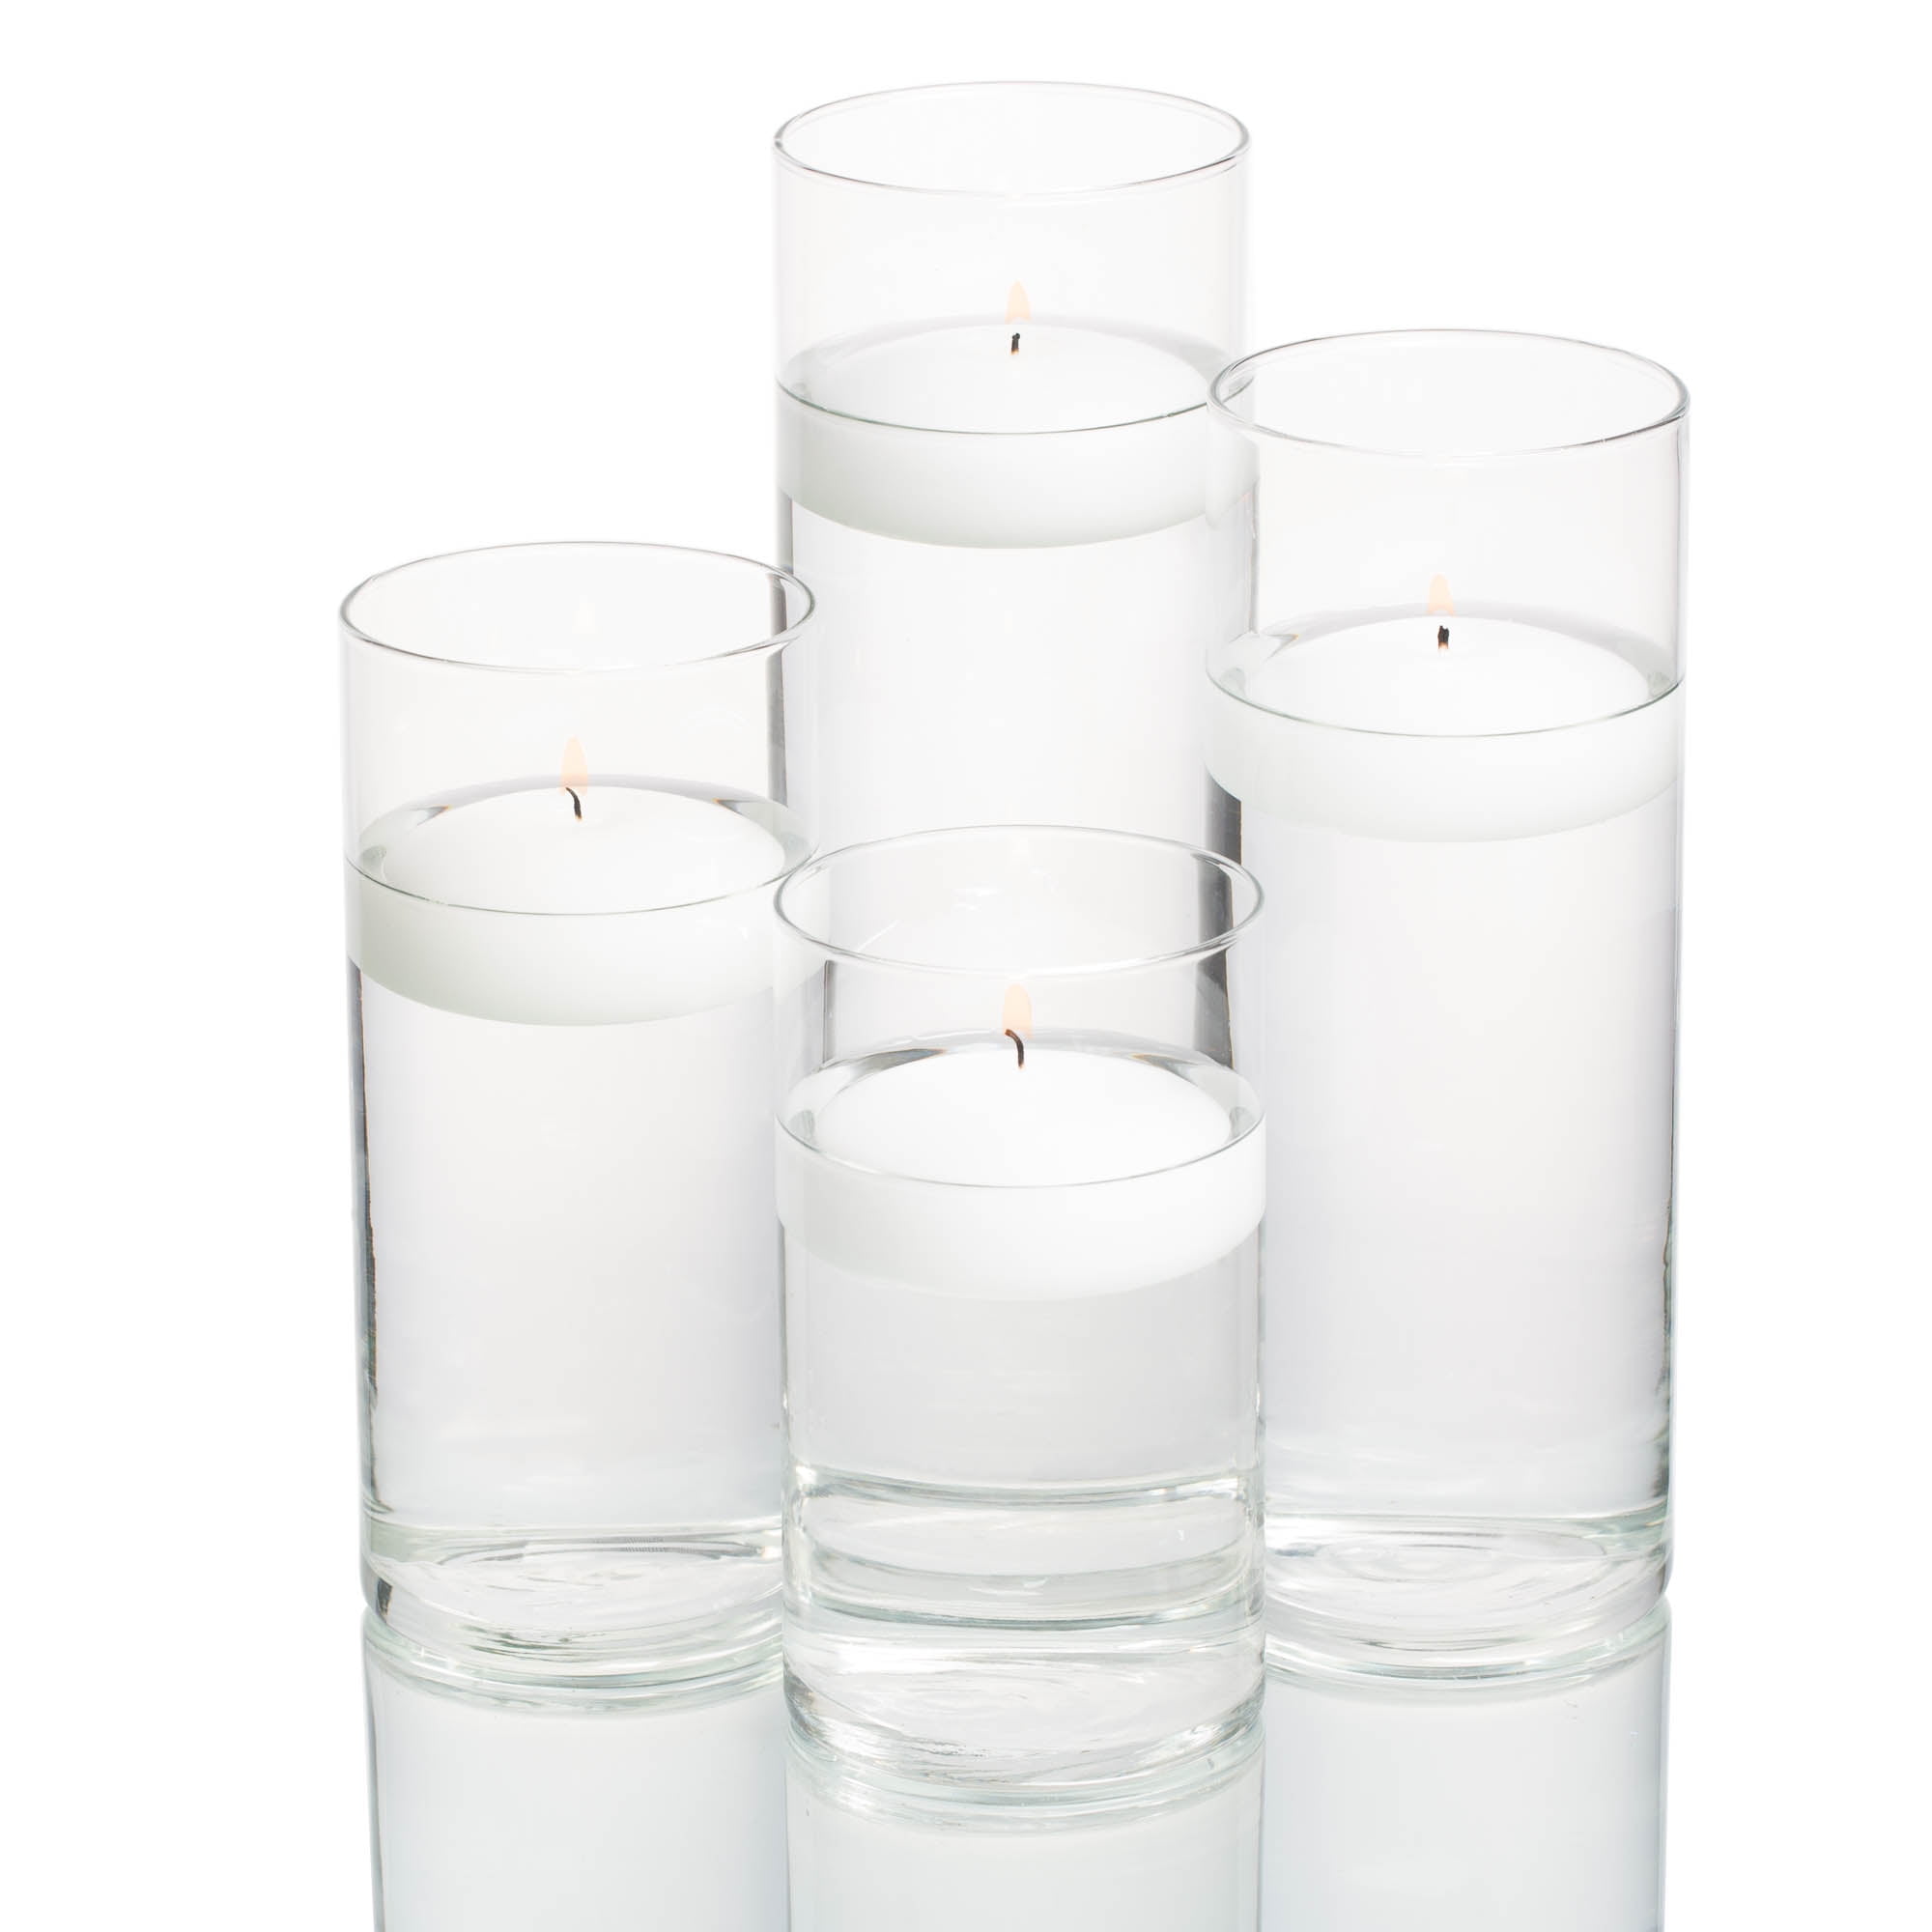 Floating candle holders